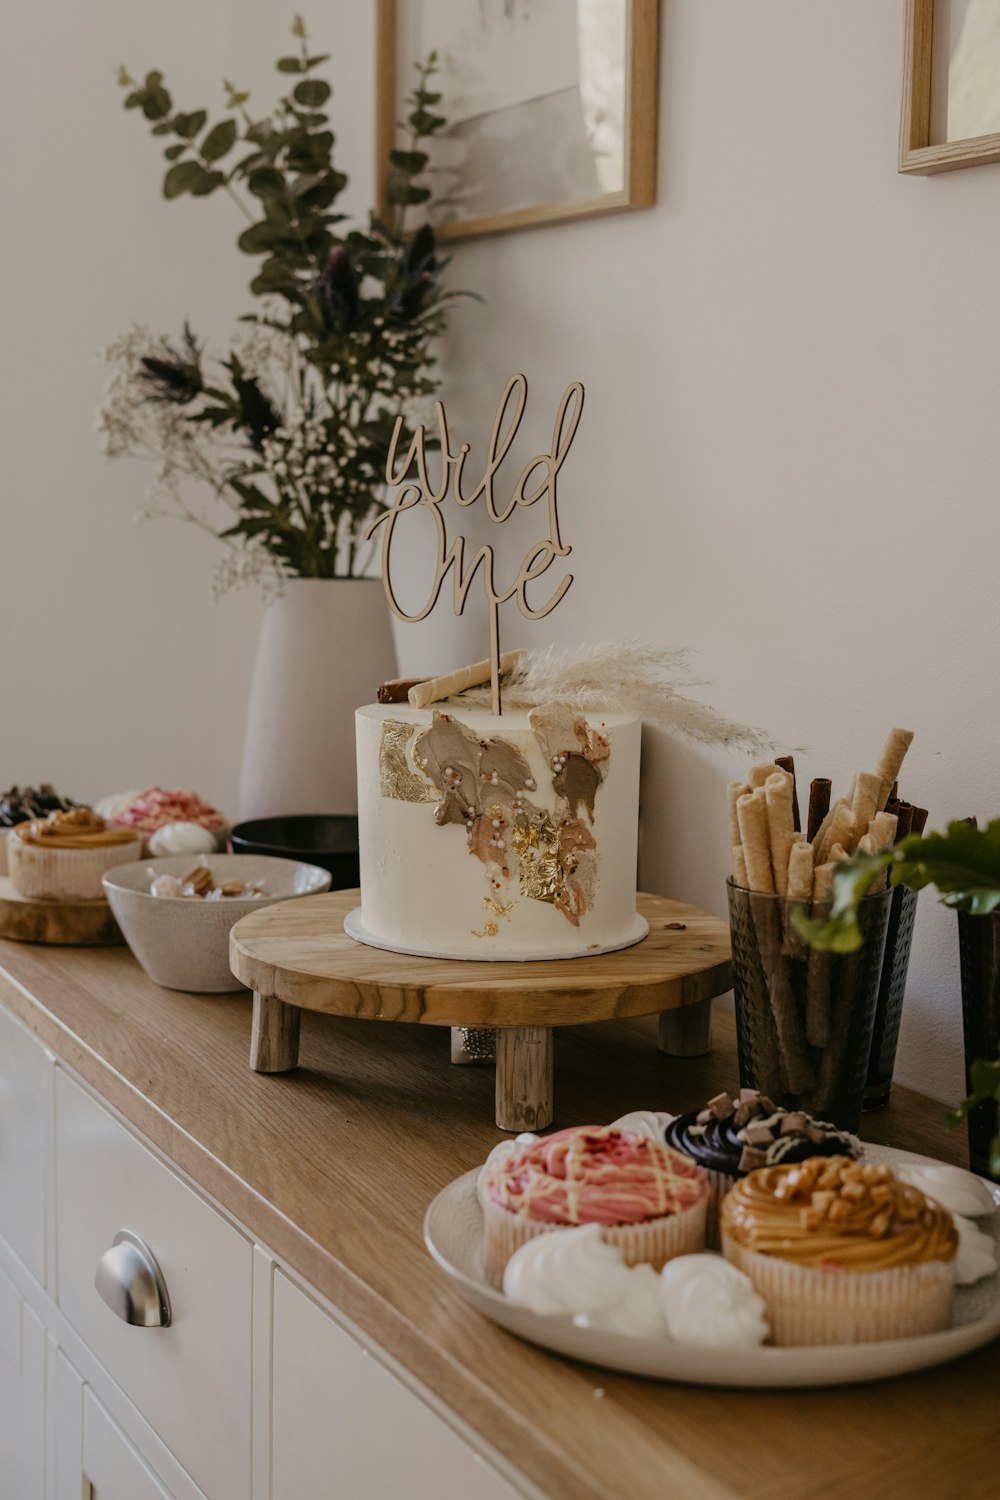 white and brown cake on brown wooden table